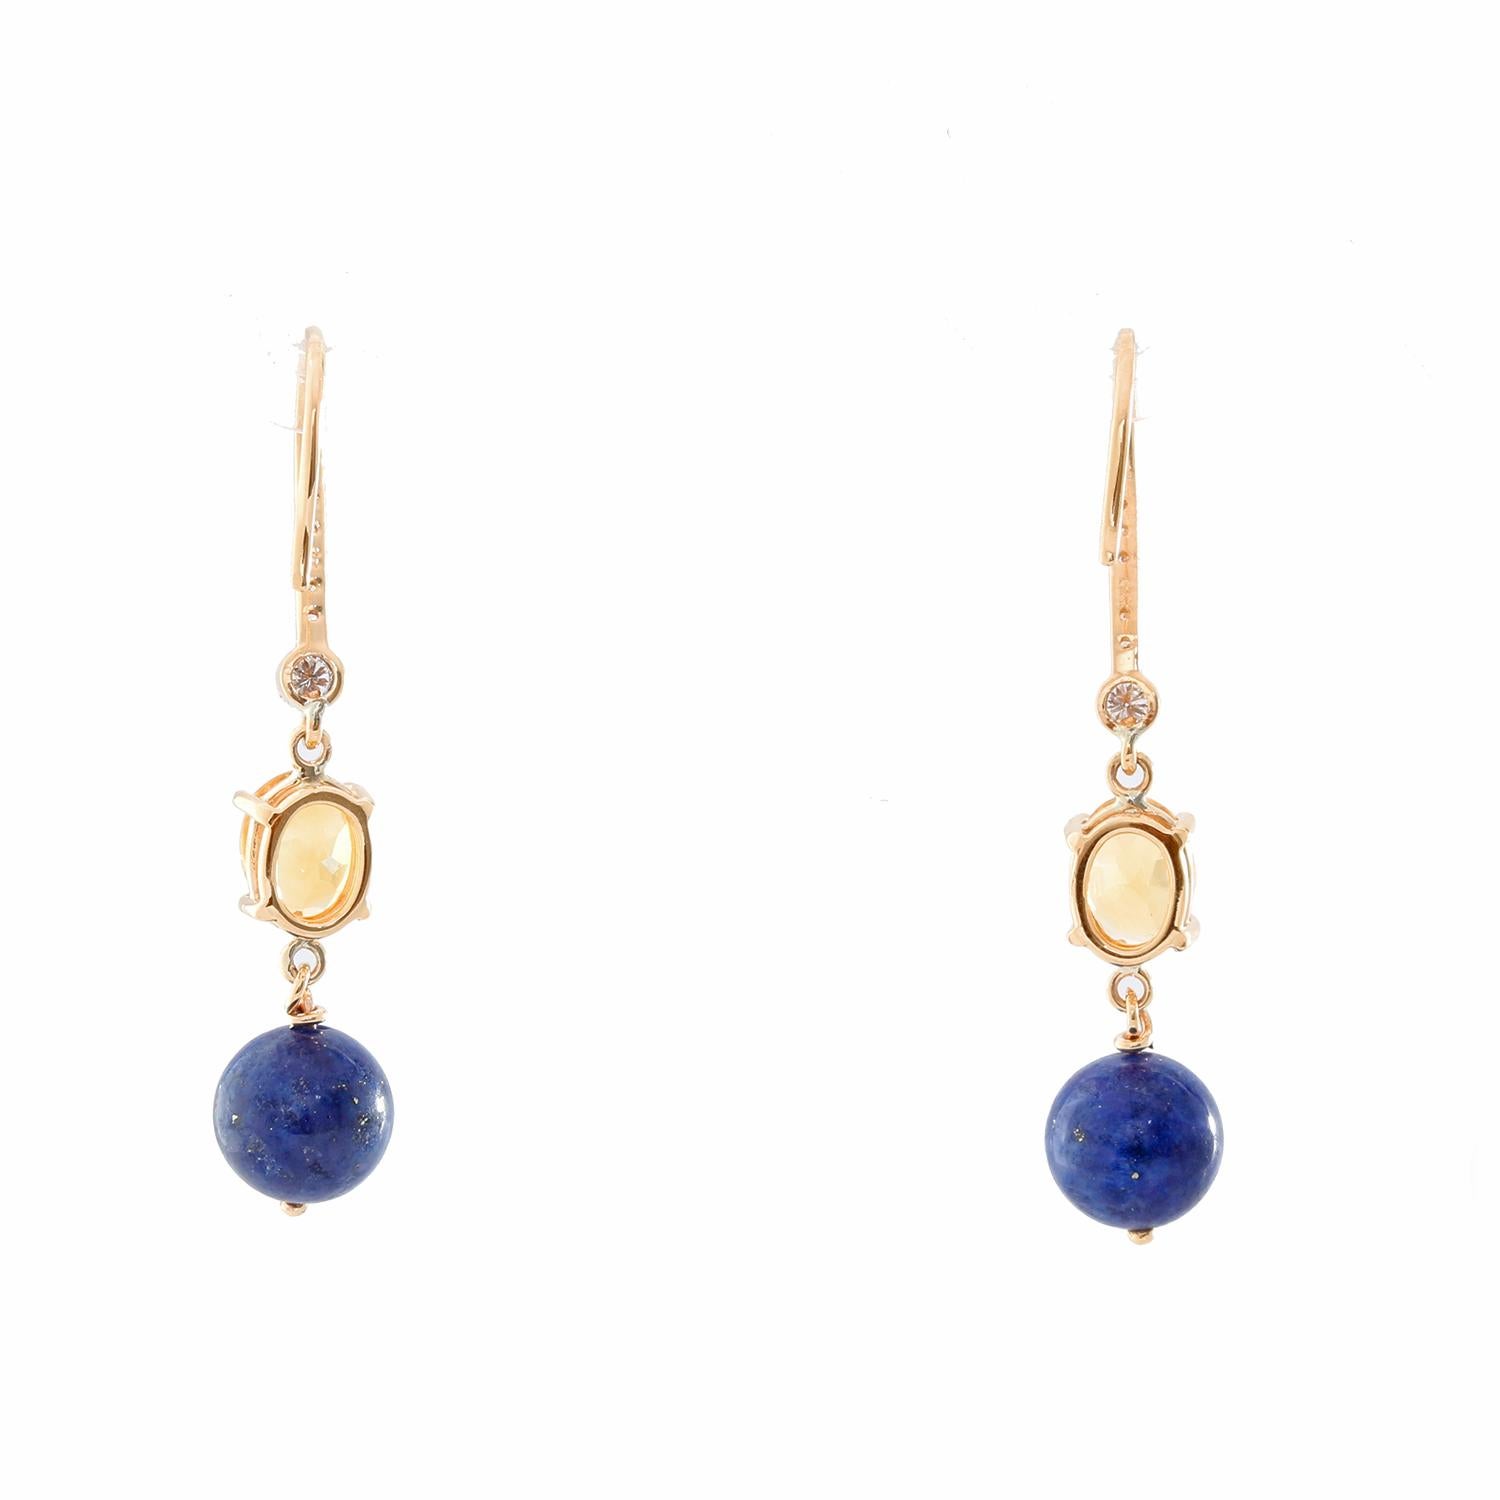 14 Yellow Gold Citrine and Blue Lapiz Diamond Dangle Earrings  - Oval cut Citrine with a a Lapis Lazuli ball. Set in 14K yellow gold with 6 diamond. Total weight 5.3. Total drop 1.5 inch. Great for everyday wear! .